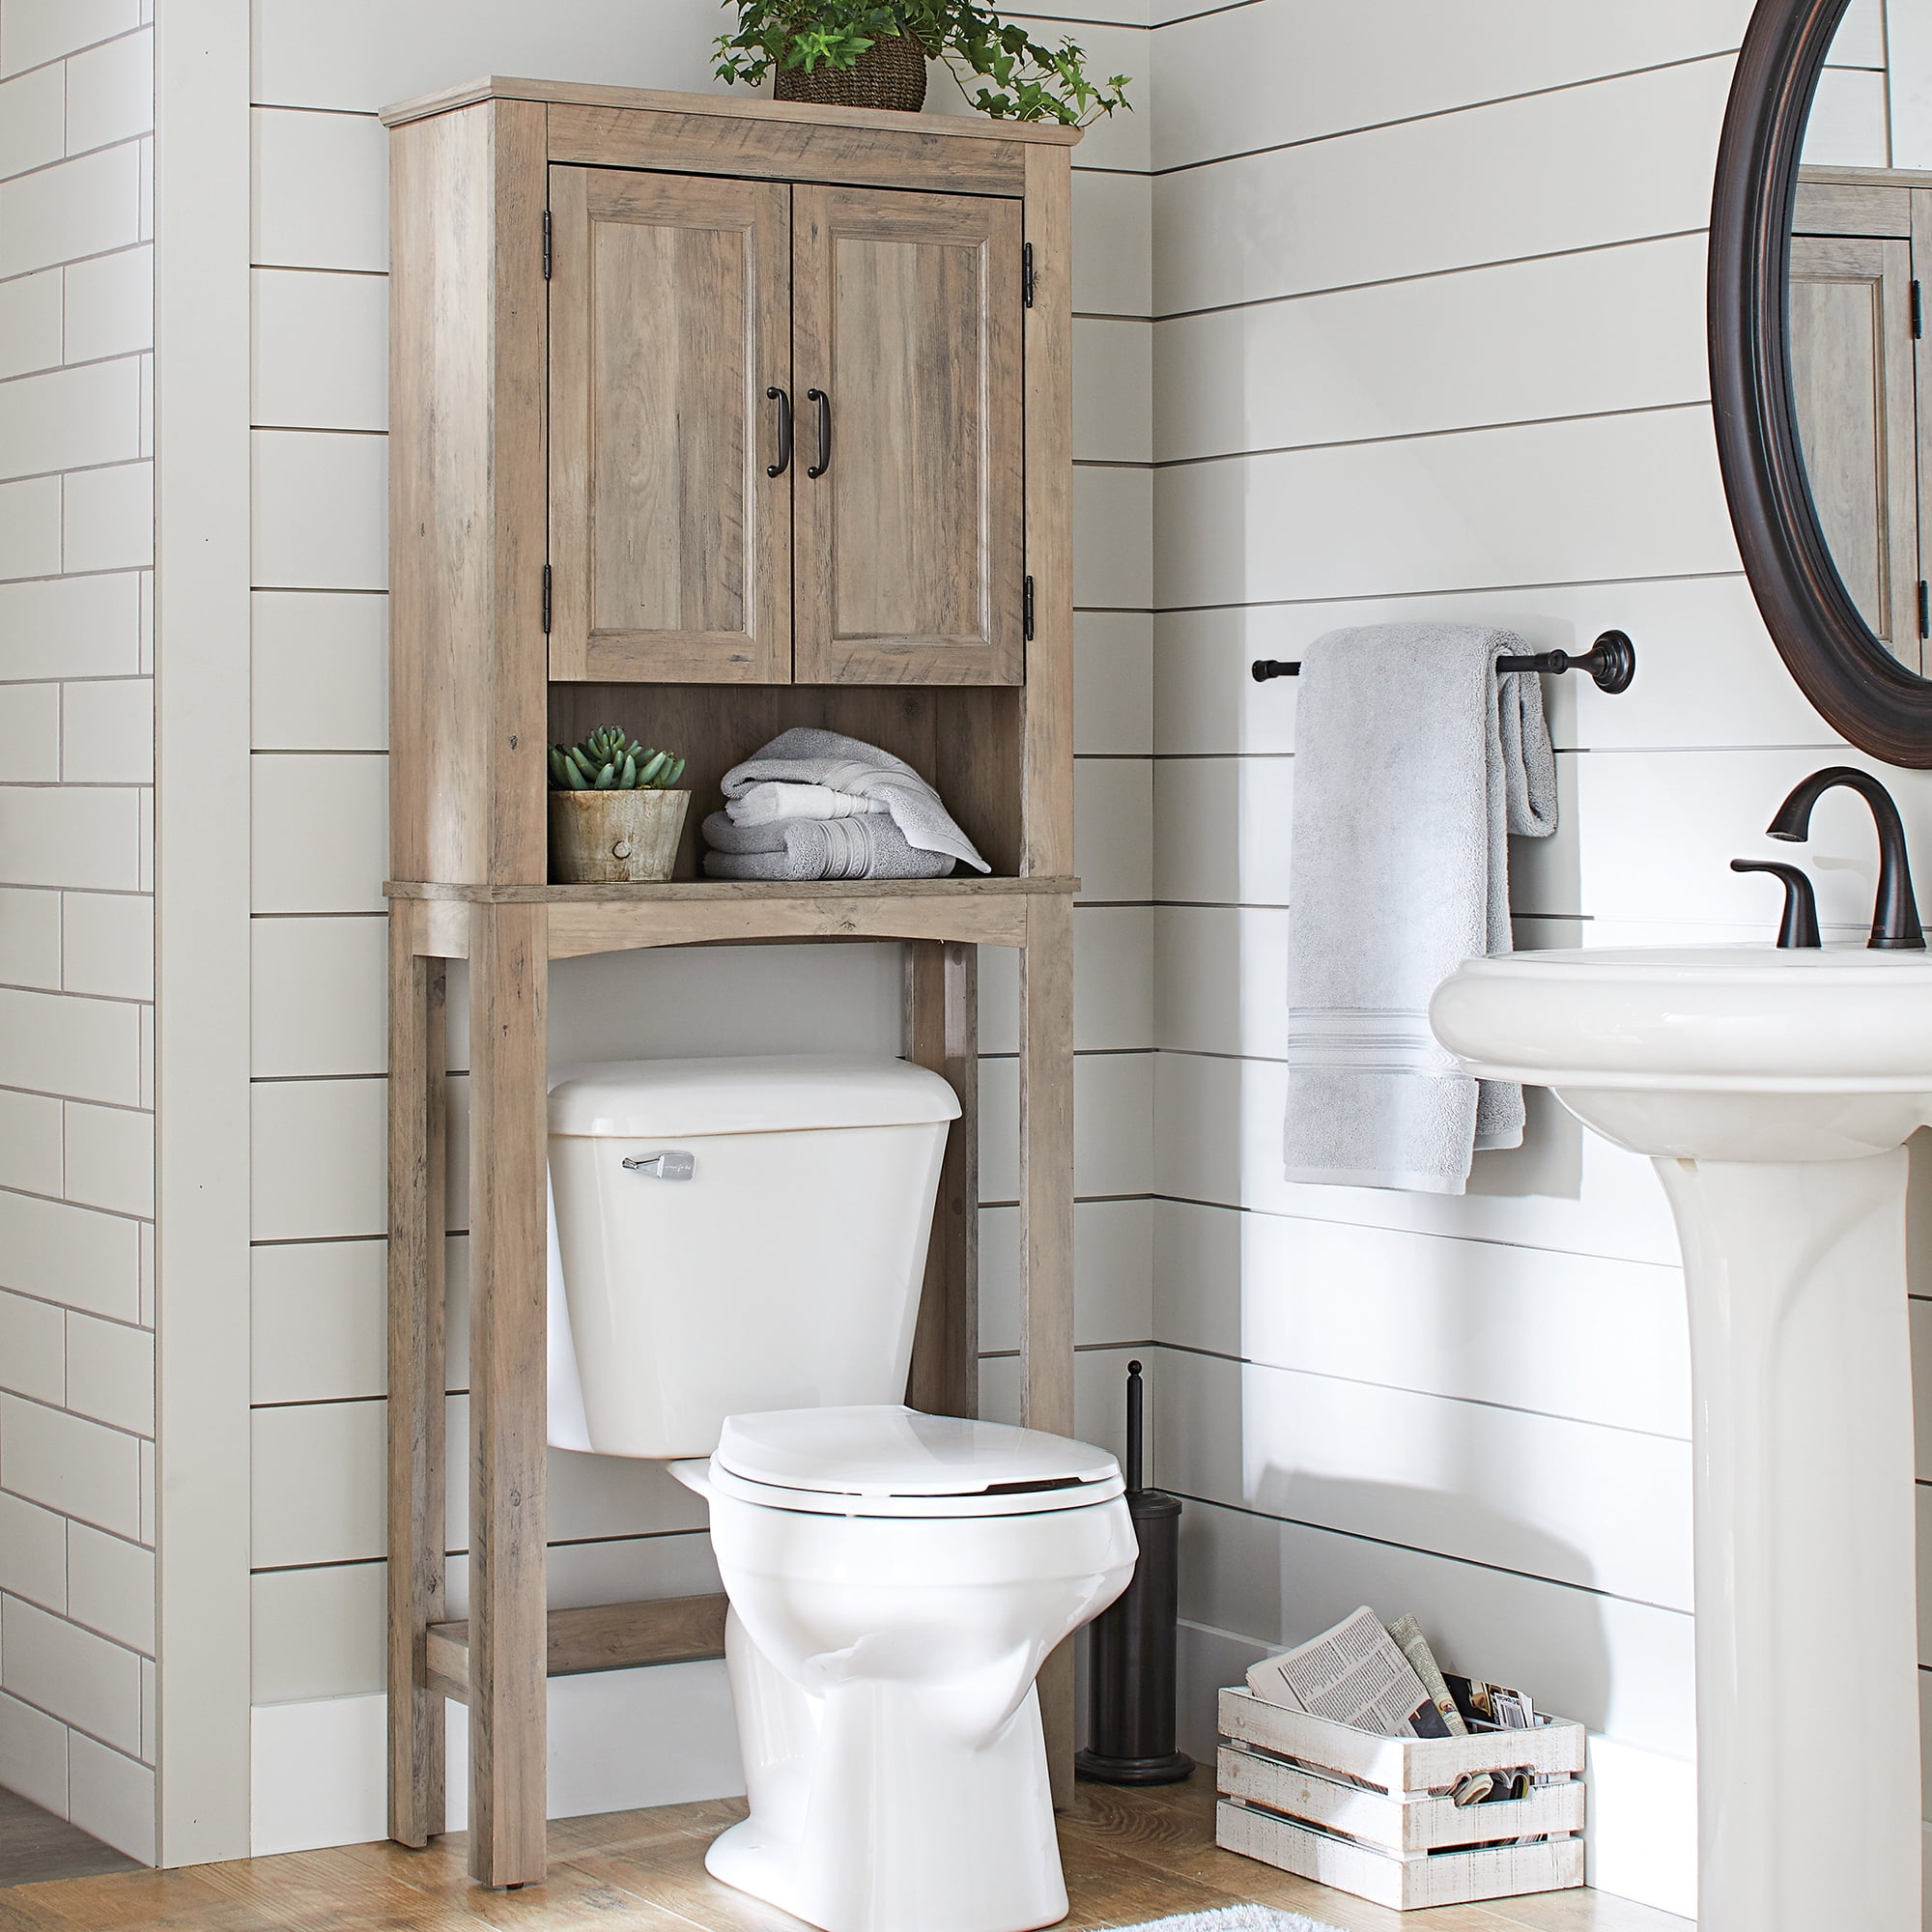 Details about   Home Bathroom Toilet Spacesaver Over-The-Toilet  Bathroom Storage Cabinet White 